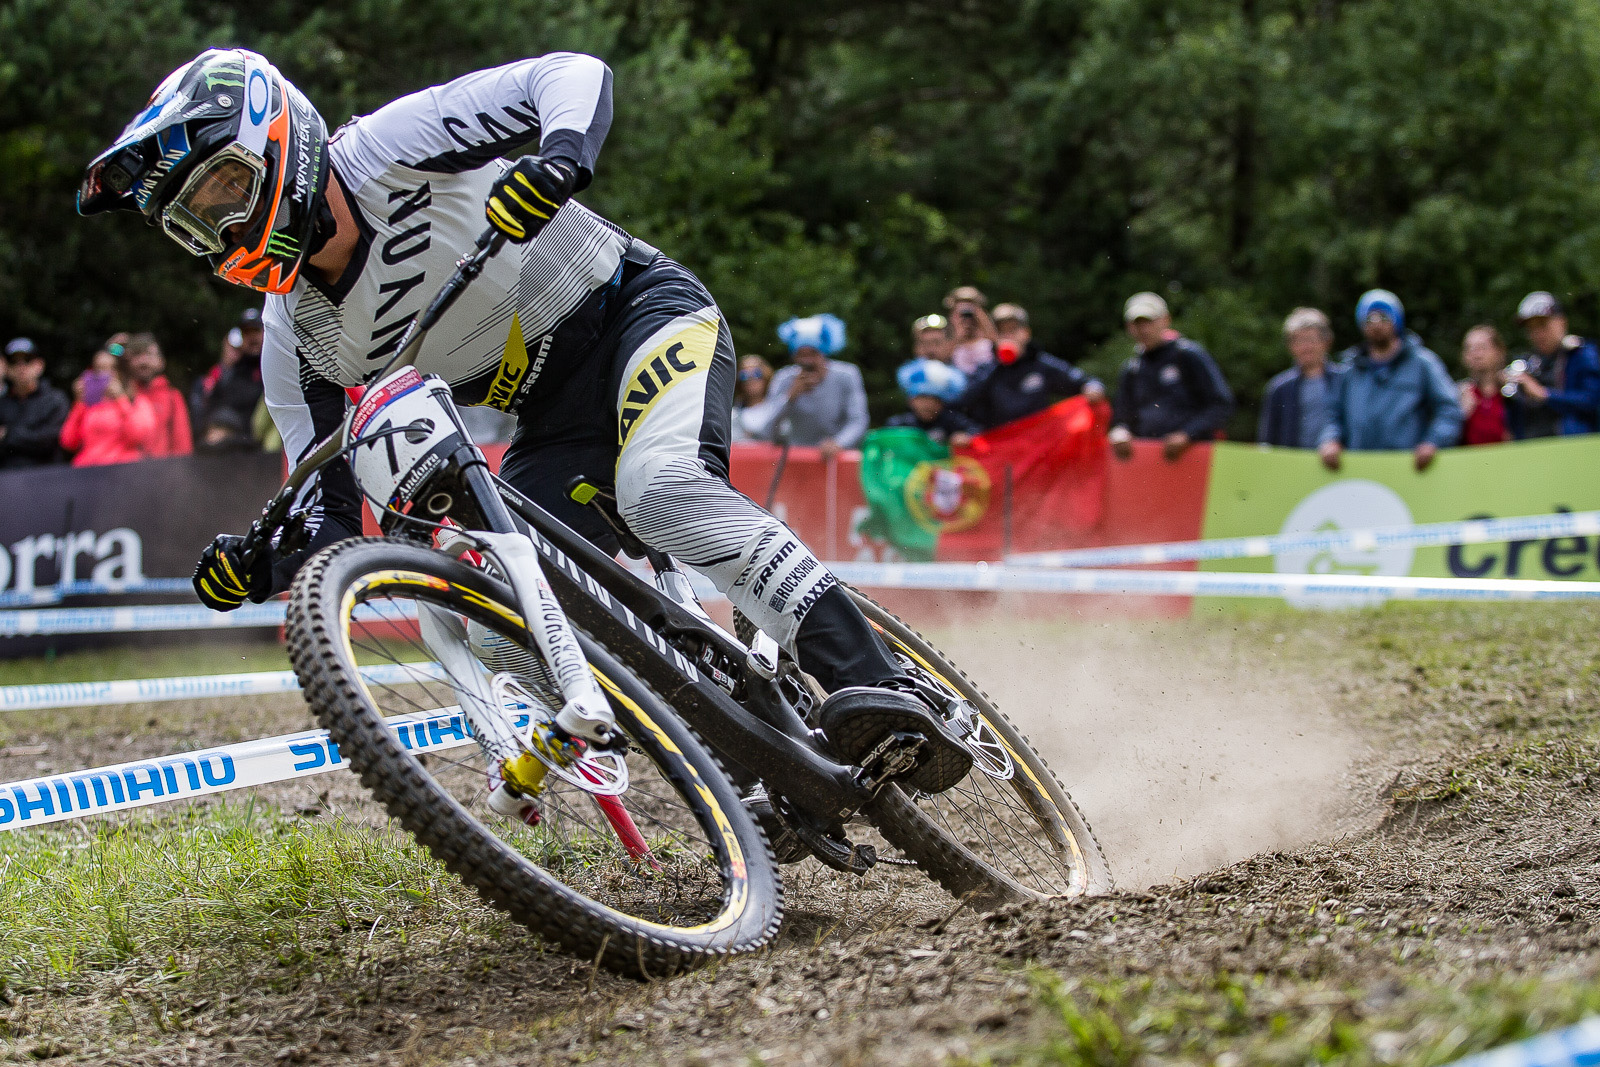 Monster Energy’s Troy Brosnan Wins UCI MTB World Cup at Round 4 in Vallnord, Andorra